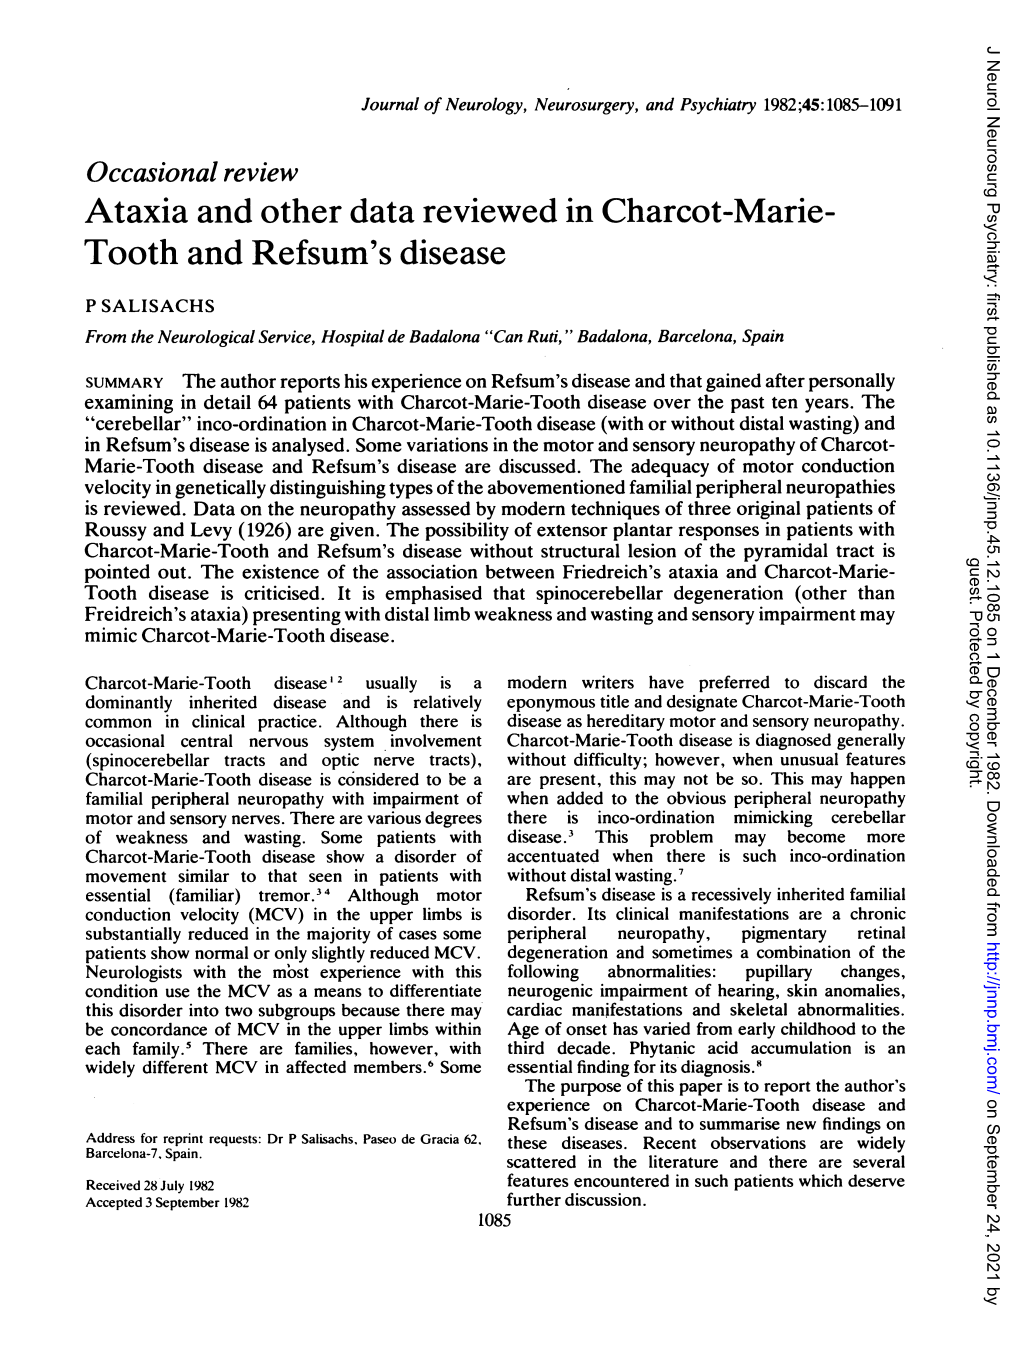 Ataxia and Other Data Reviewedin Charcot-Marie- Tooth and Refsum's